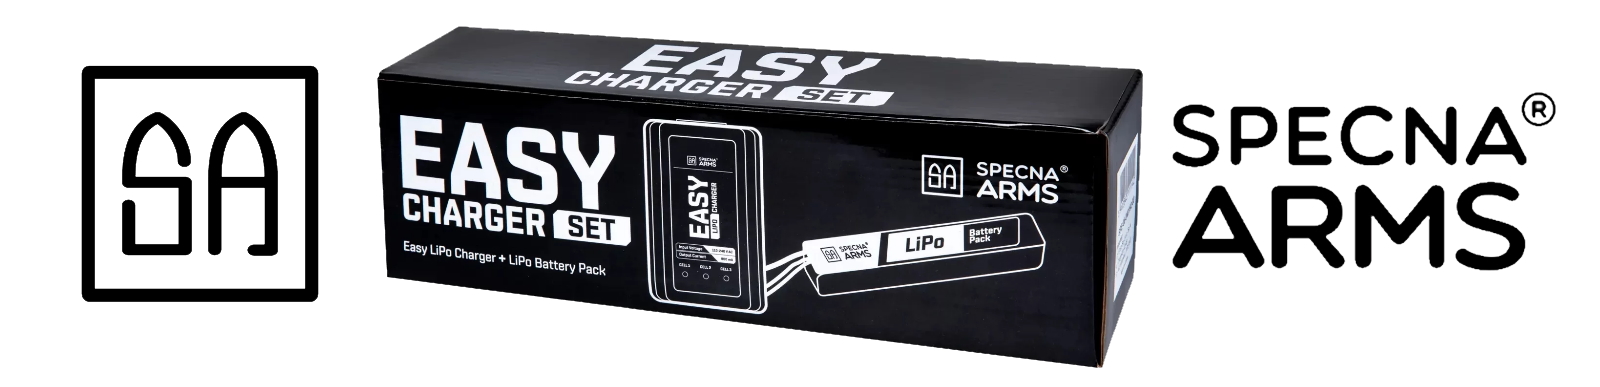 EASY CHARGER SET